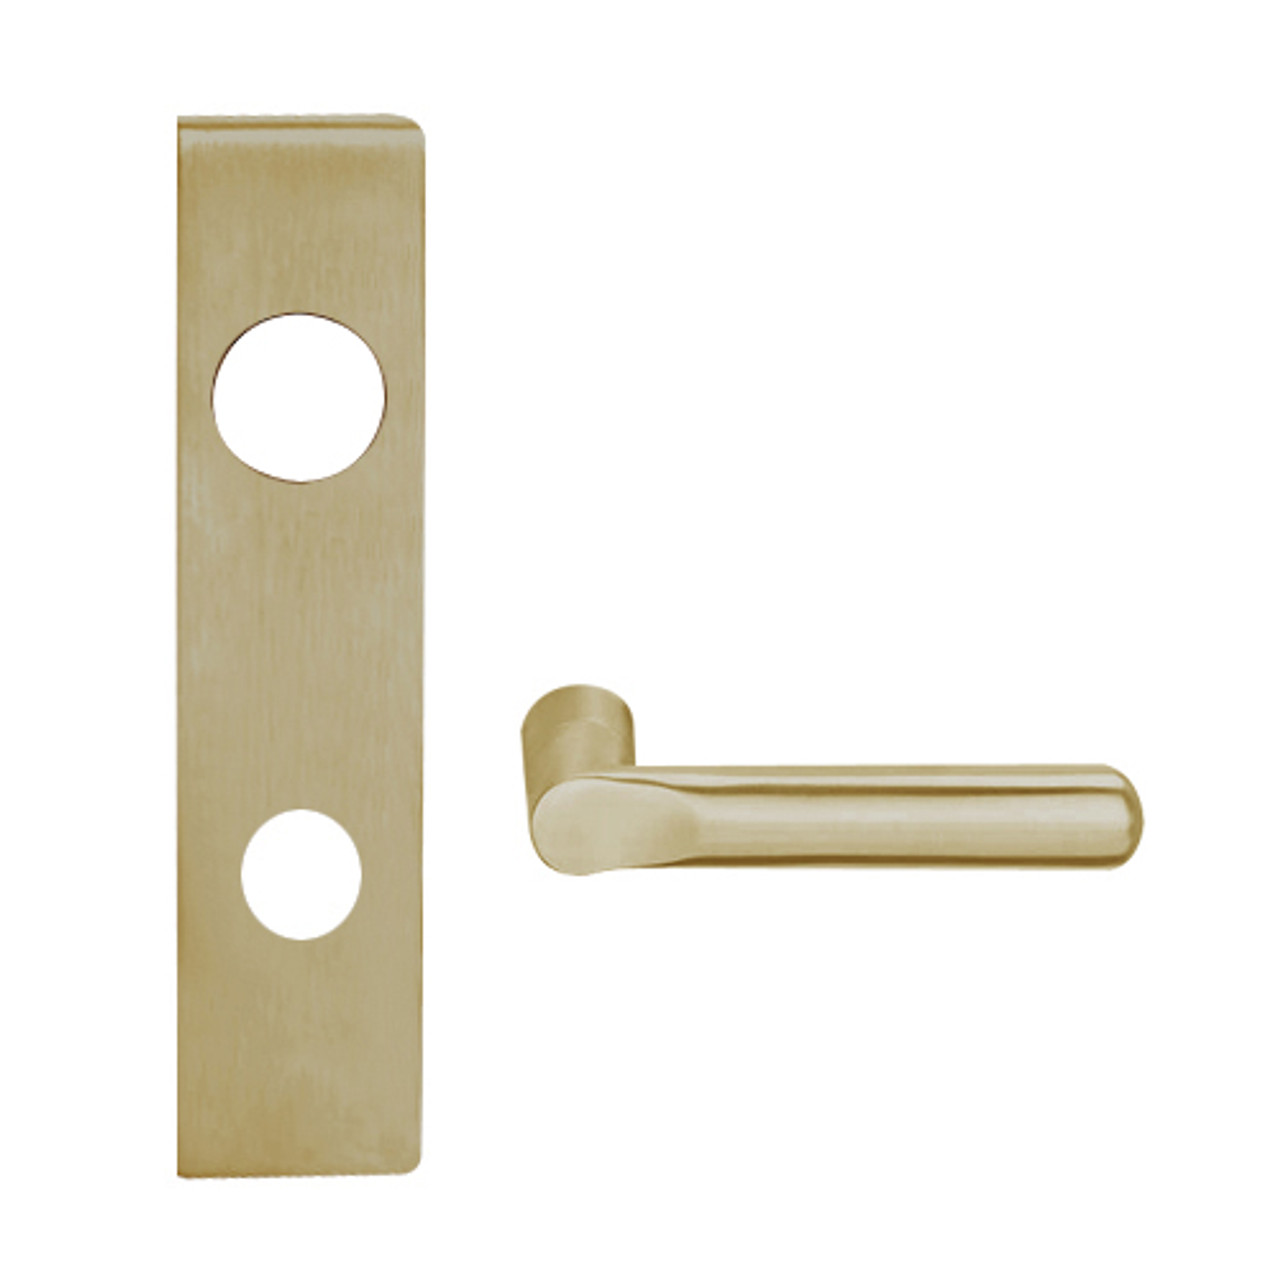 L9026R-18L-613 Schlage L Series Exit Lock with Cylinder Commercial Mortise Lock with 18 Cast Lever Design and Full Size Core in Oil Rubbed Bronze